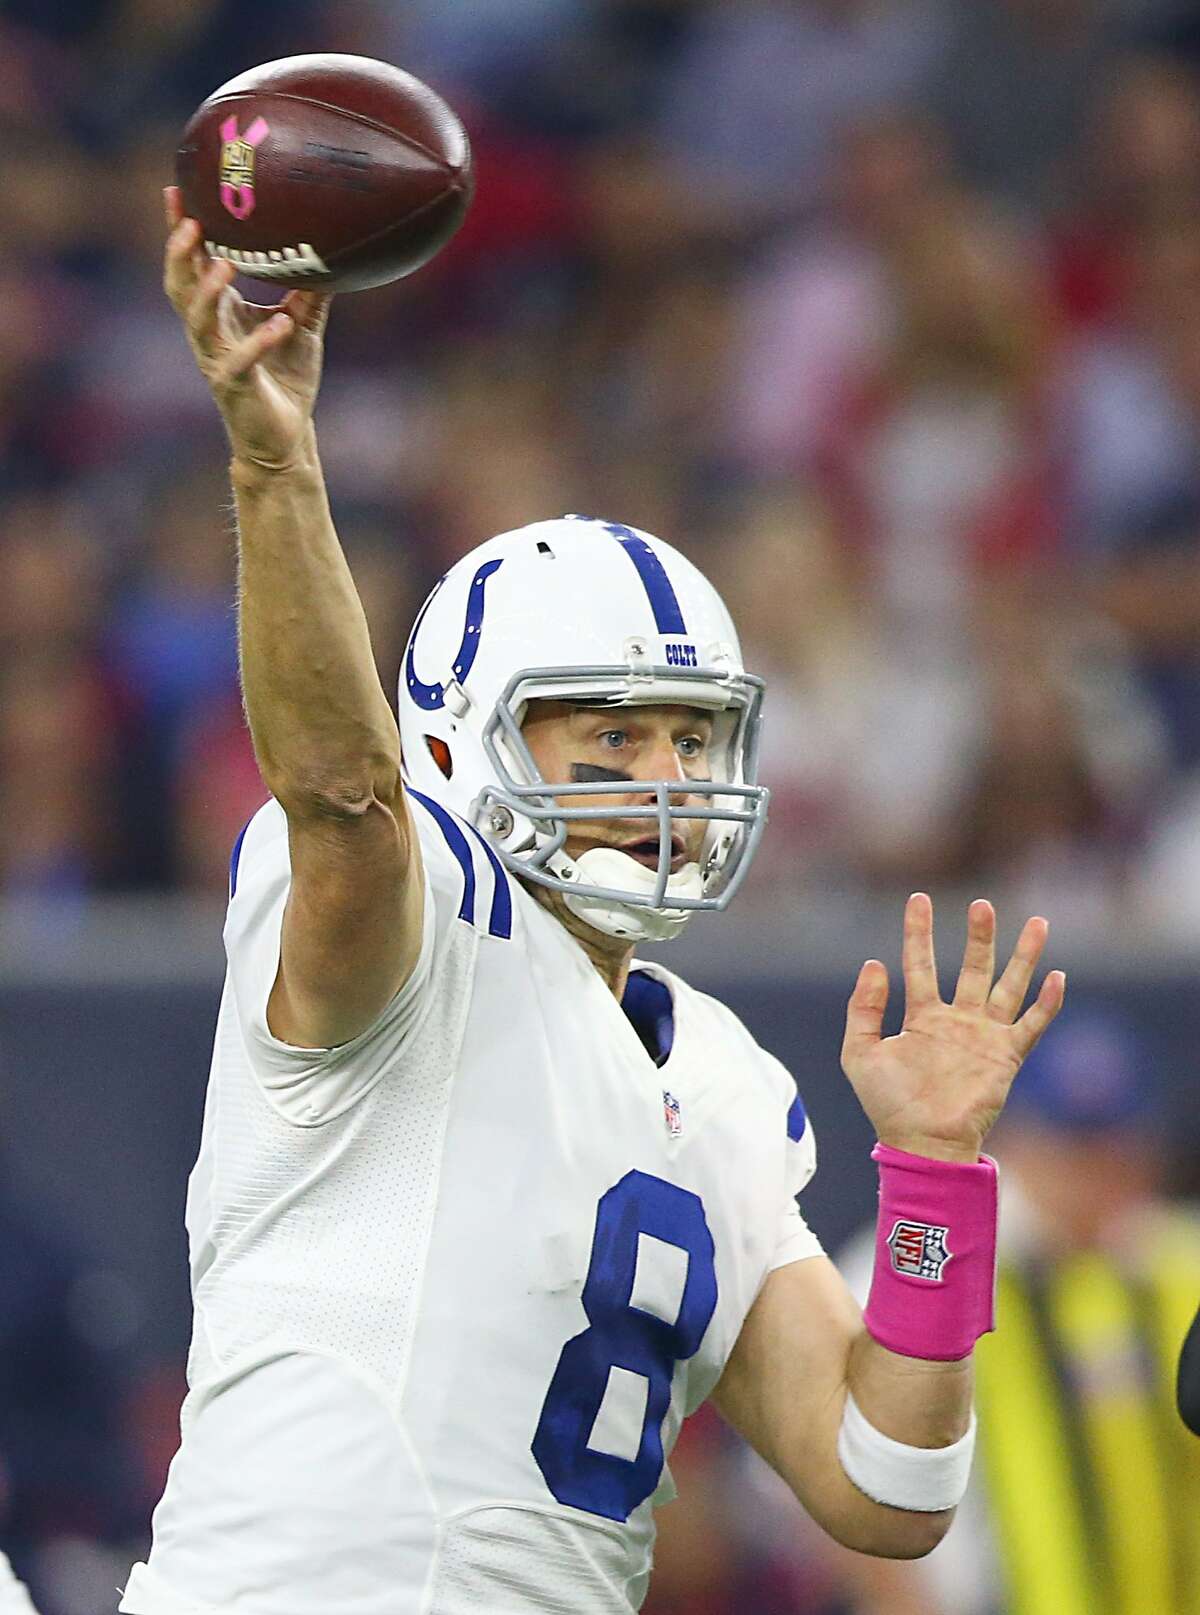 HOUSTON, TX - OCTOBER 08: Matt Hasselbeck #8 of the Indianapolis Colts passes against the Houston Texans on October 8, 2015 at NRG Stadium in Houston, Texas. (Photo by Ronald Martinez/Getty Images)